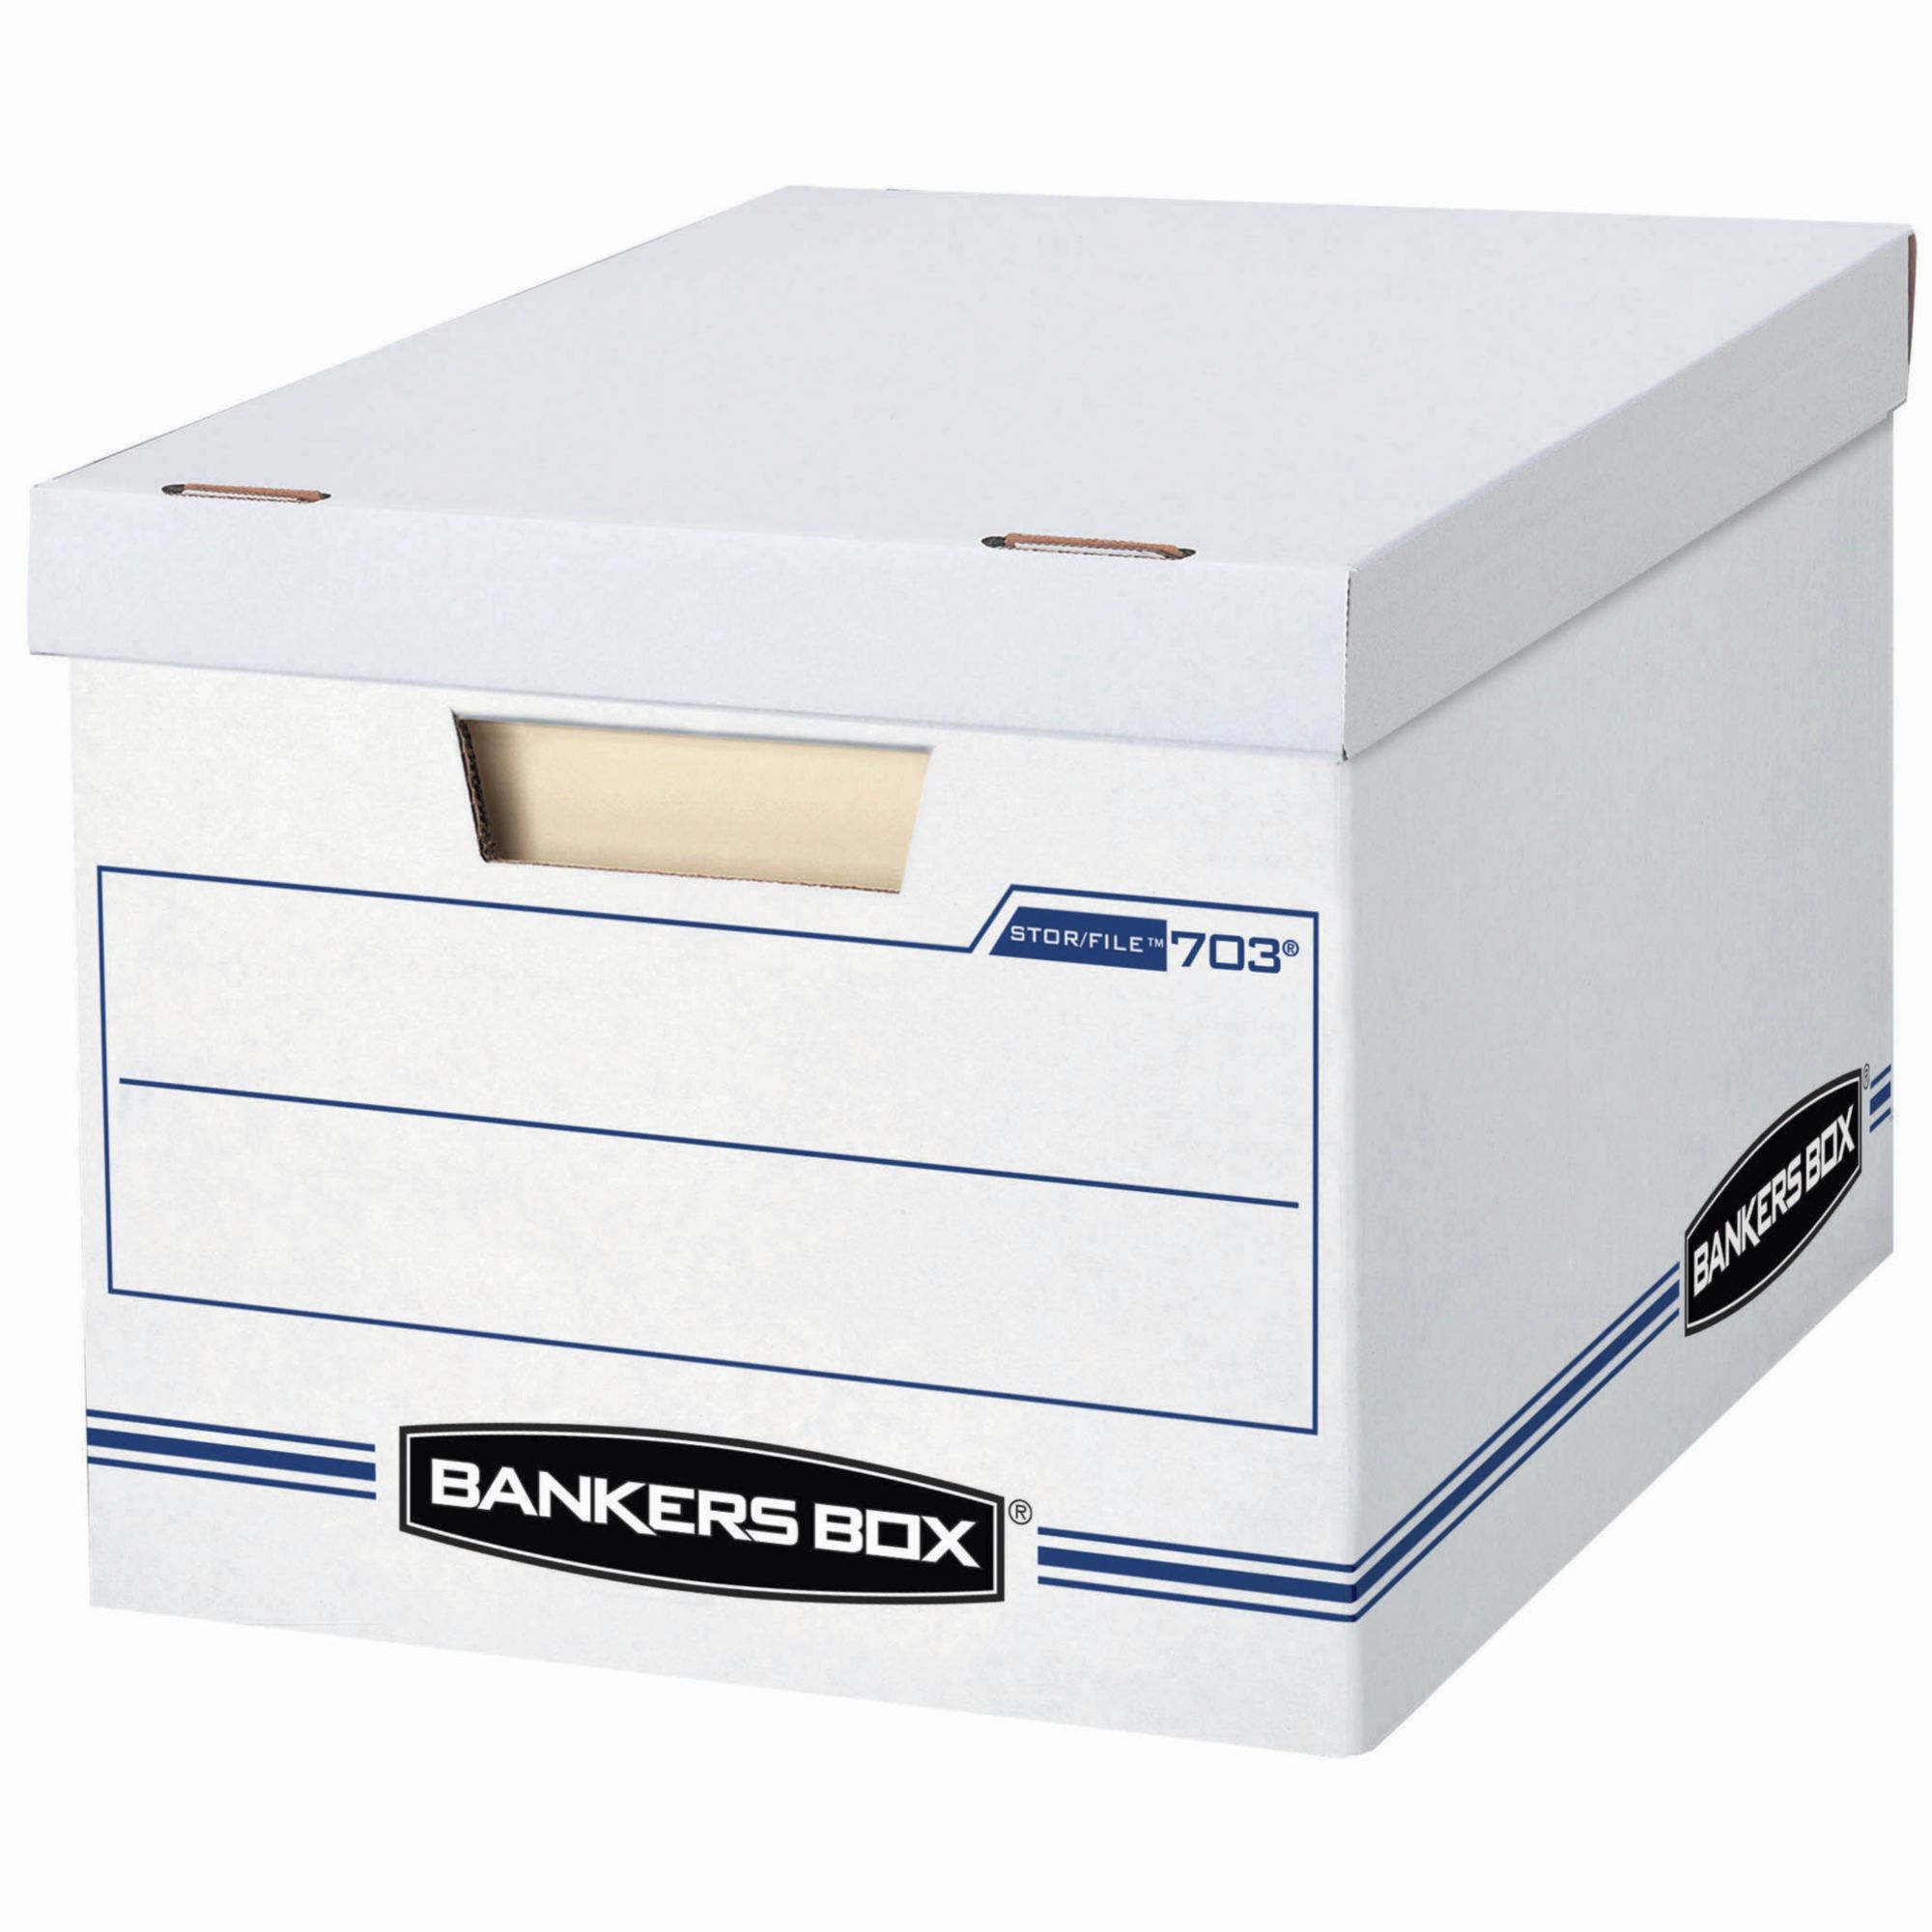 Bankers Box File/Store Record Storage Boxes